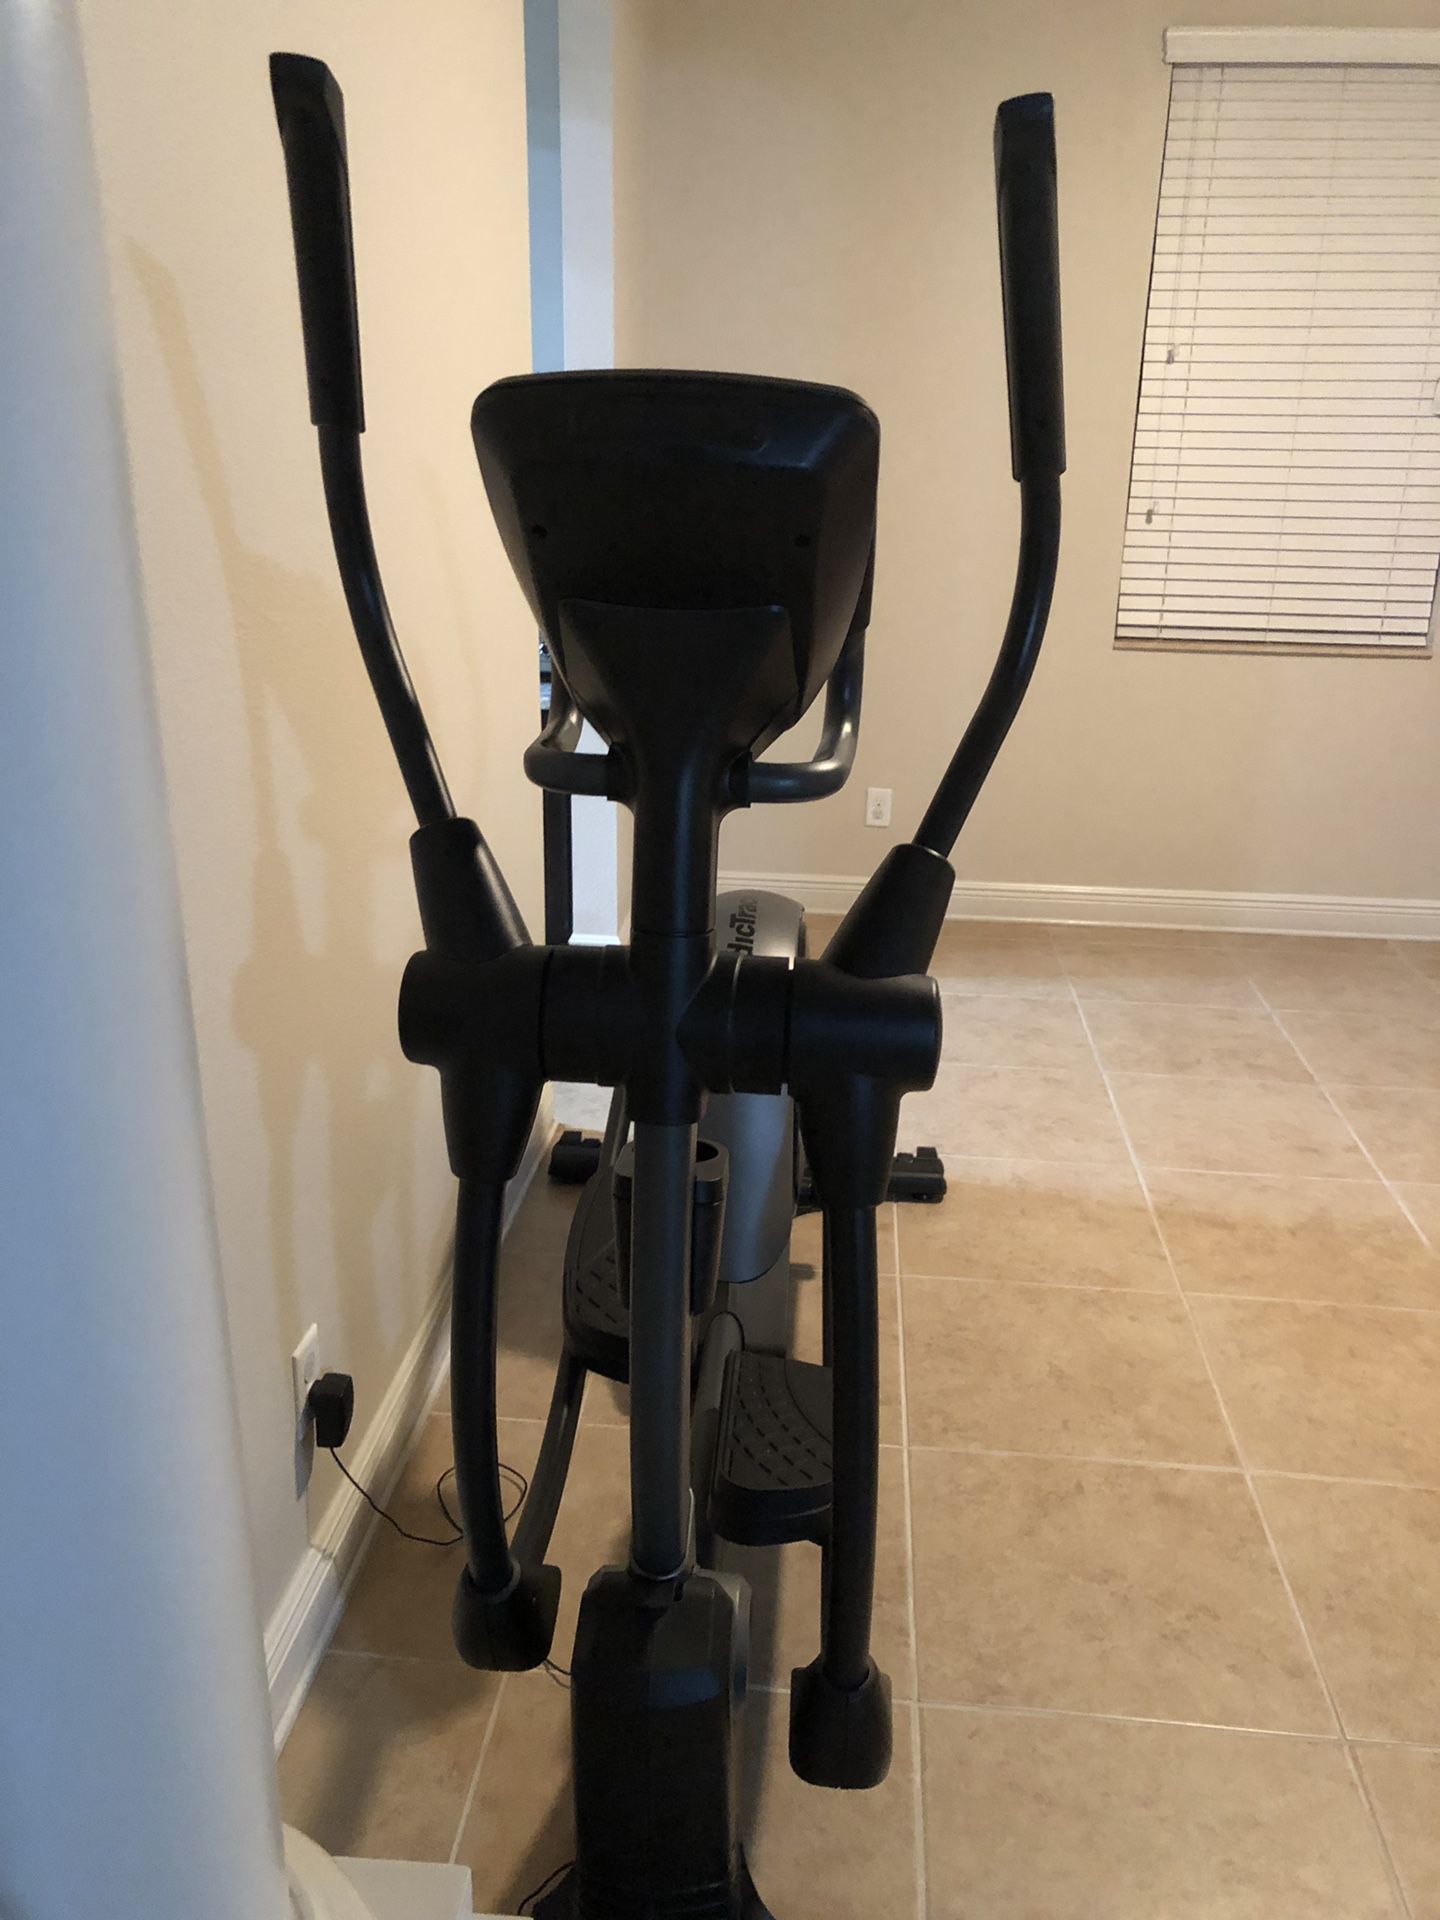 Exercise Stay Fit with NordicTrack Elliptical Very Nice Condition 